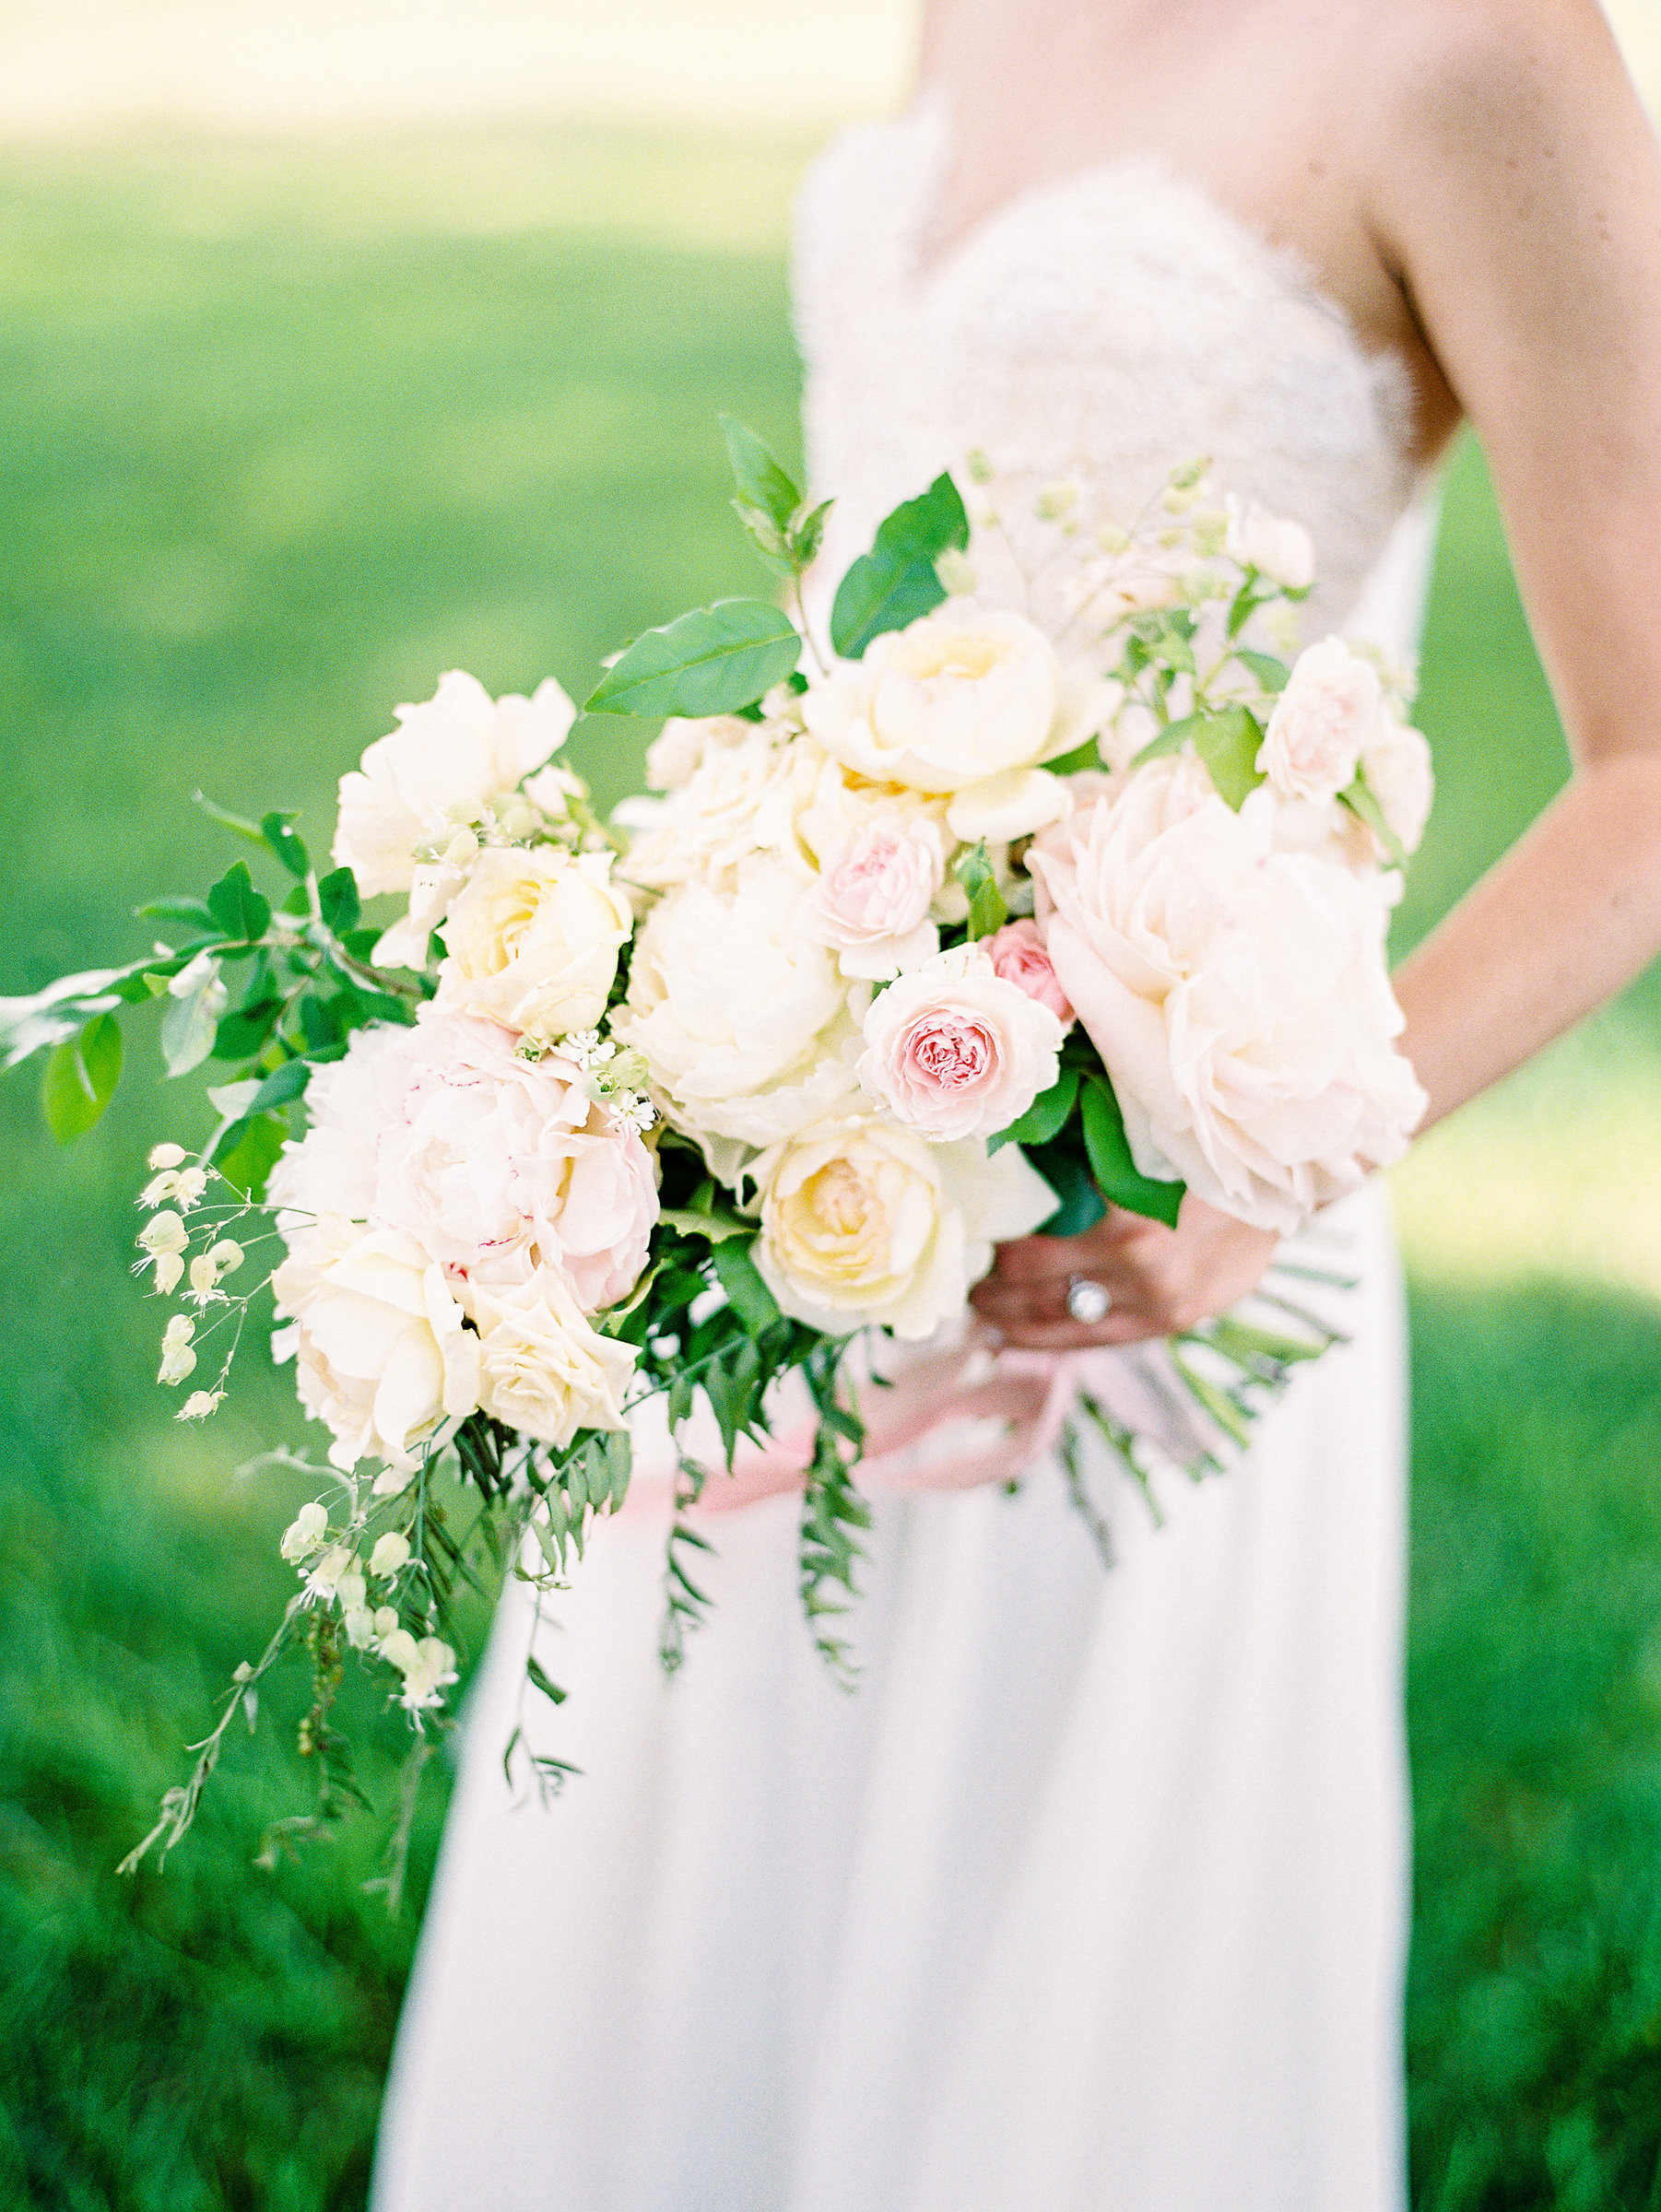 Blush Peony Bouquet | The Day's Design | Ashley Slater Photography